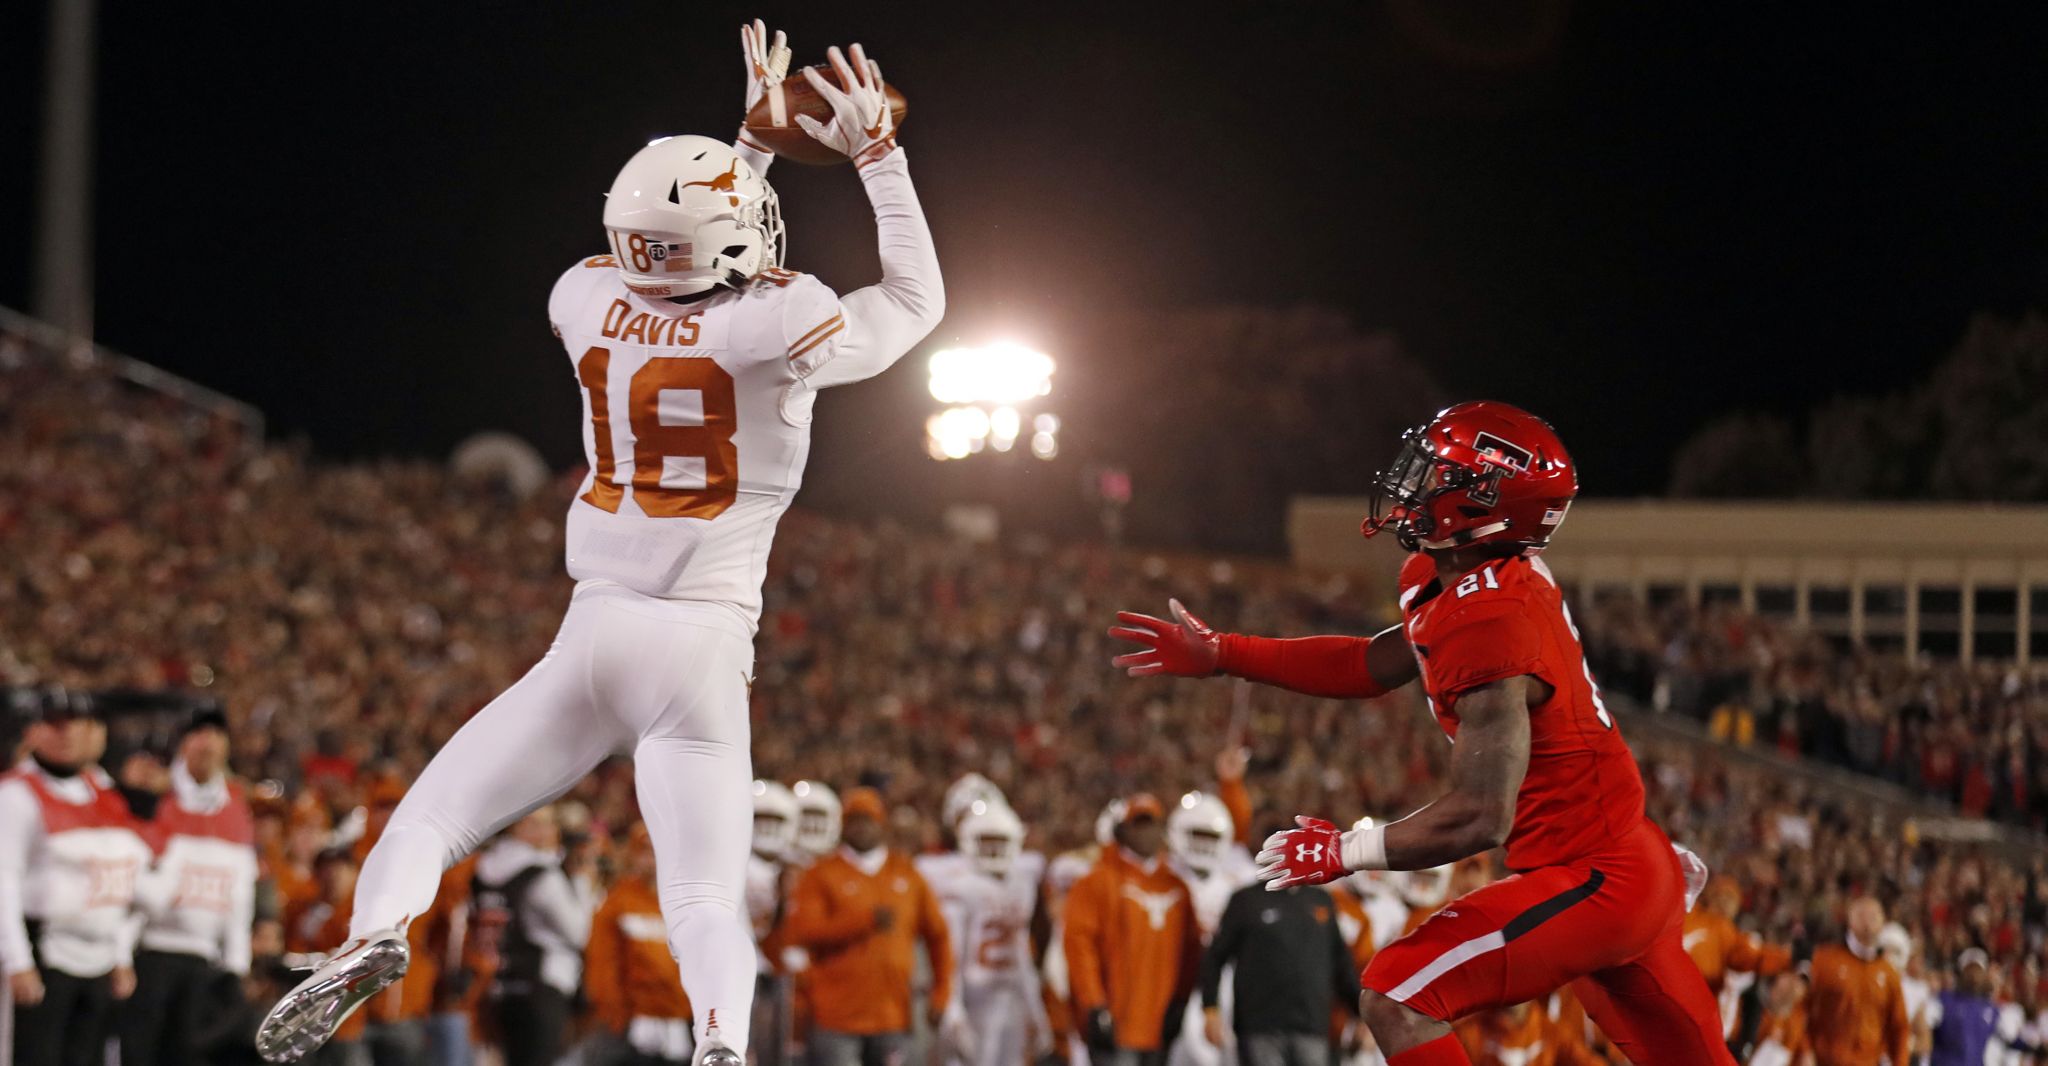 UT losing 17point lead to defeat Texas Tech